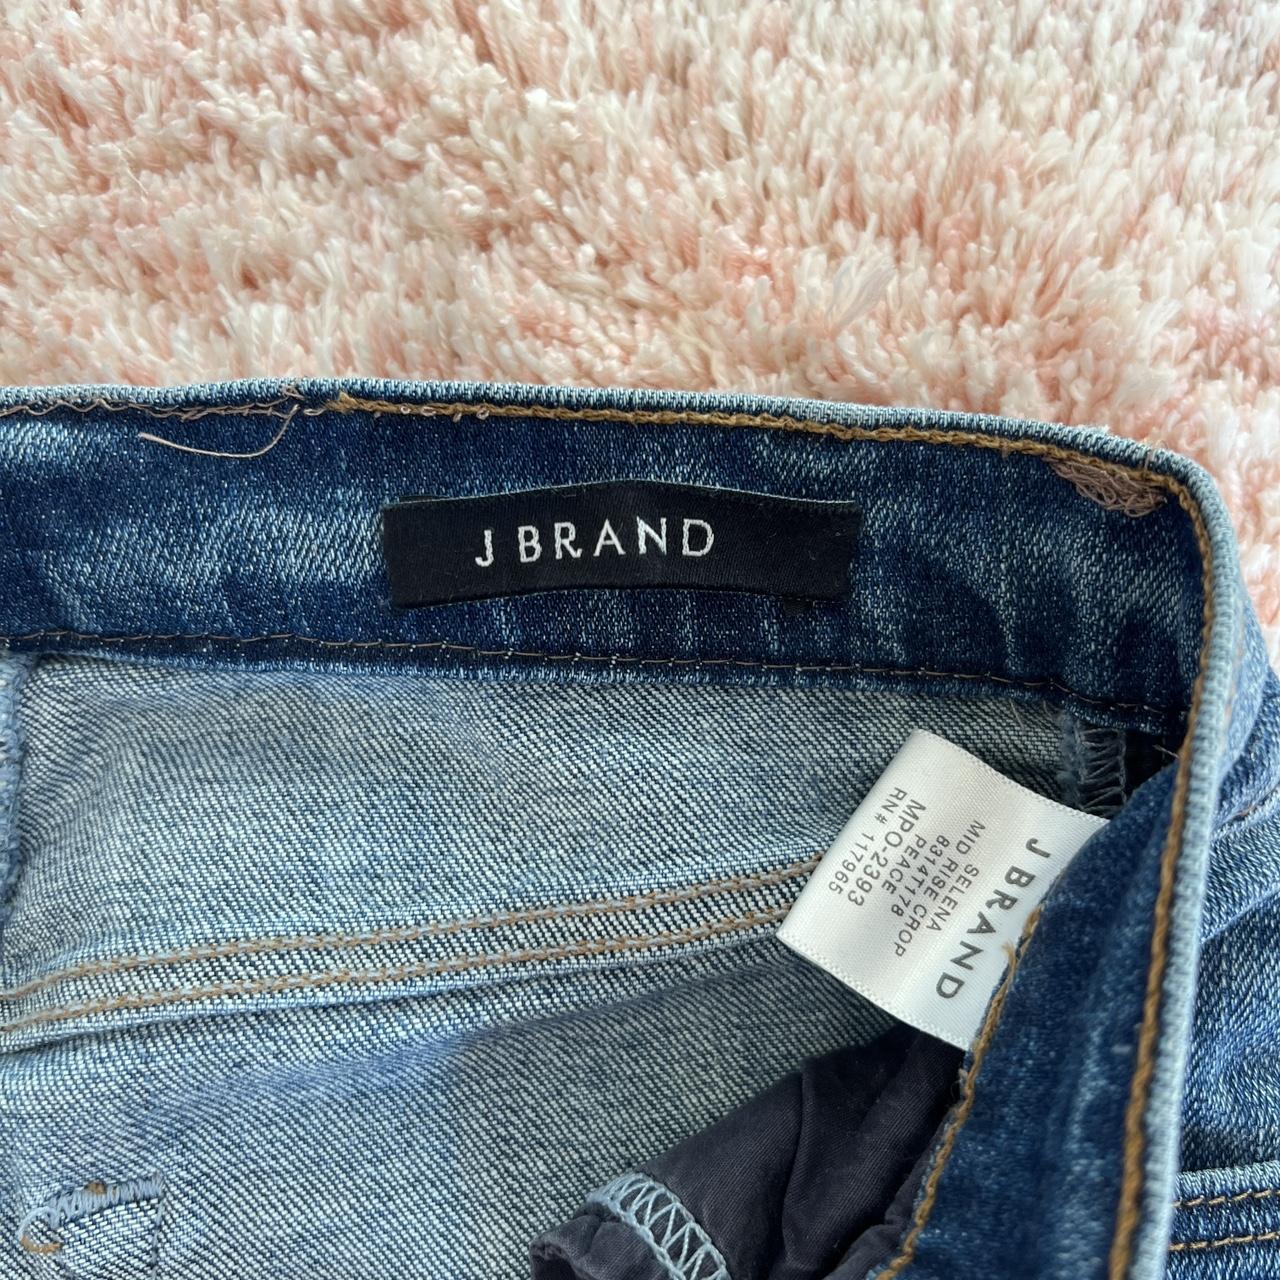 J BRAND PAINTED JEANS. Low to mid rise, size 26. - Depop